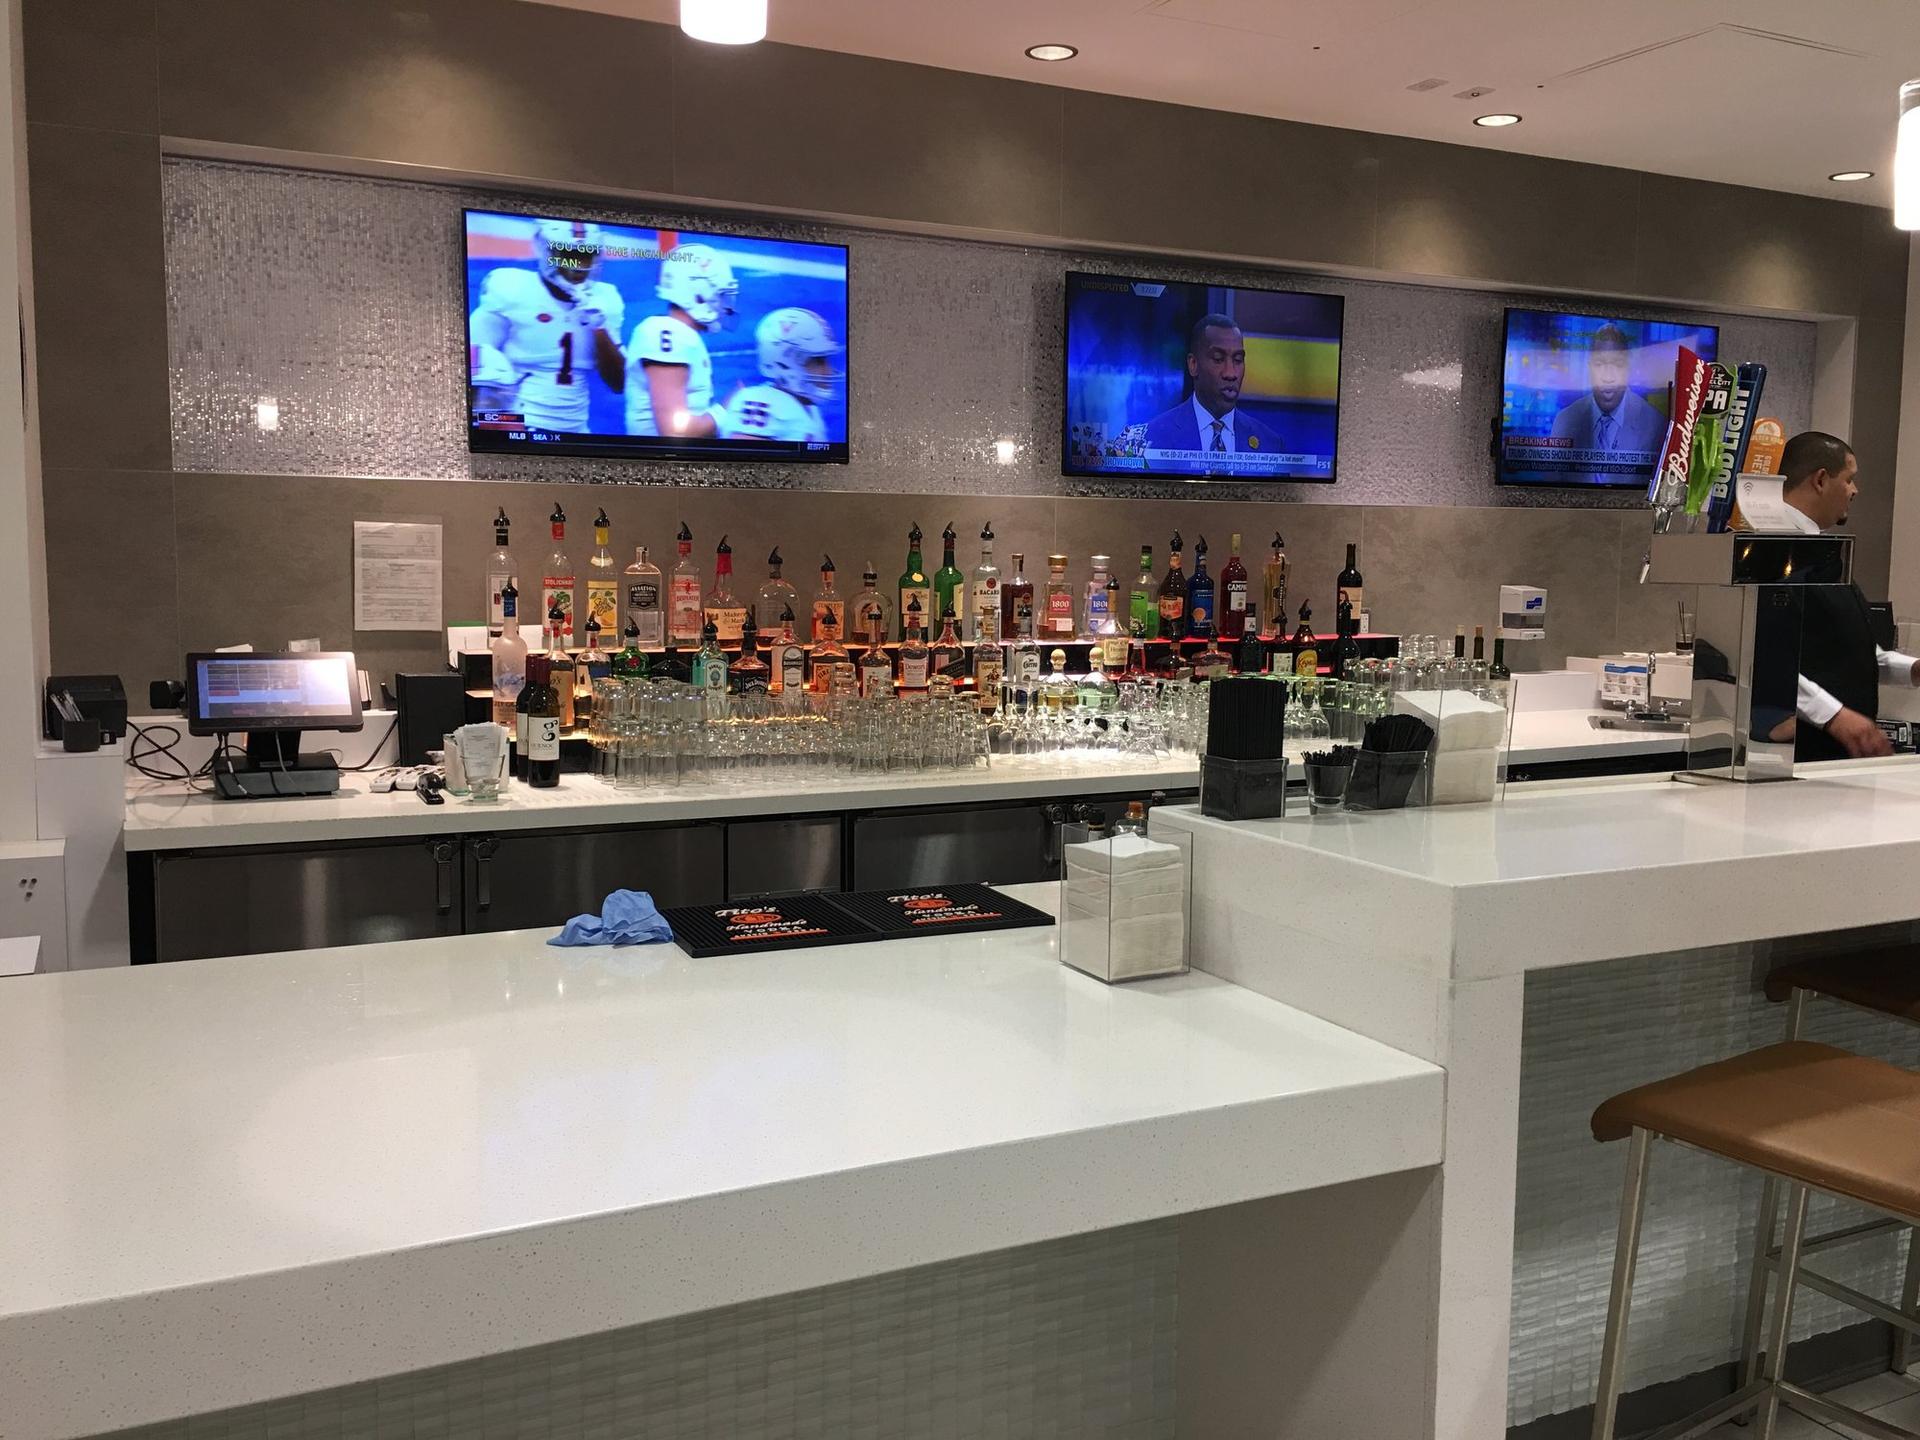 American Airlines Admirals Club image 2 of 38